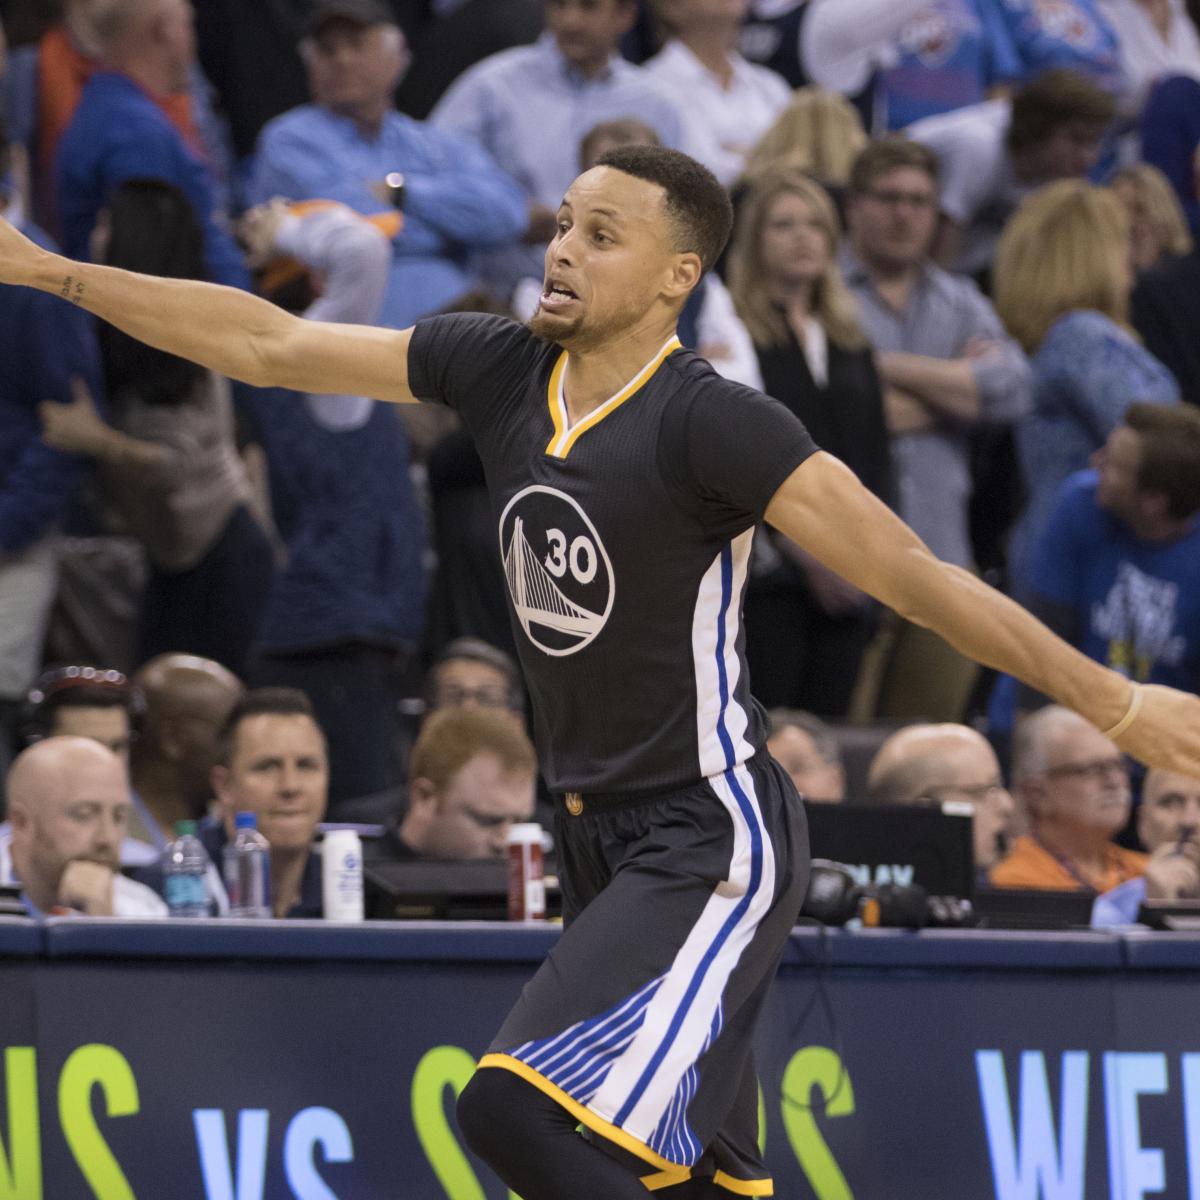 Watch: Steph Curry sinks incredible half-court shot against Celtics